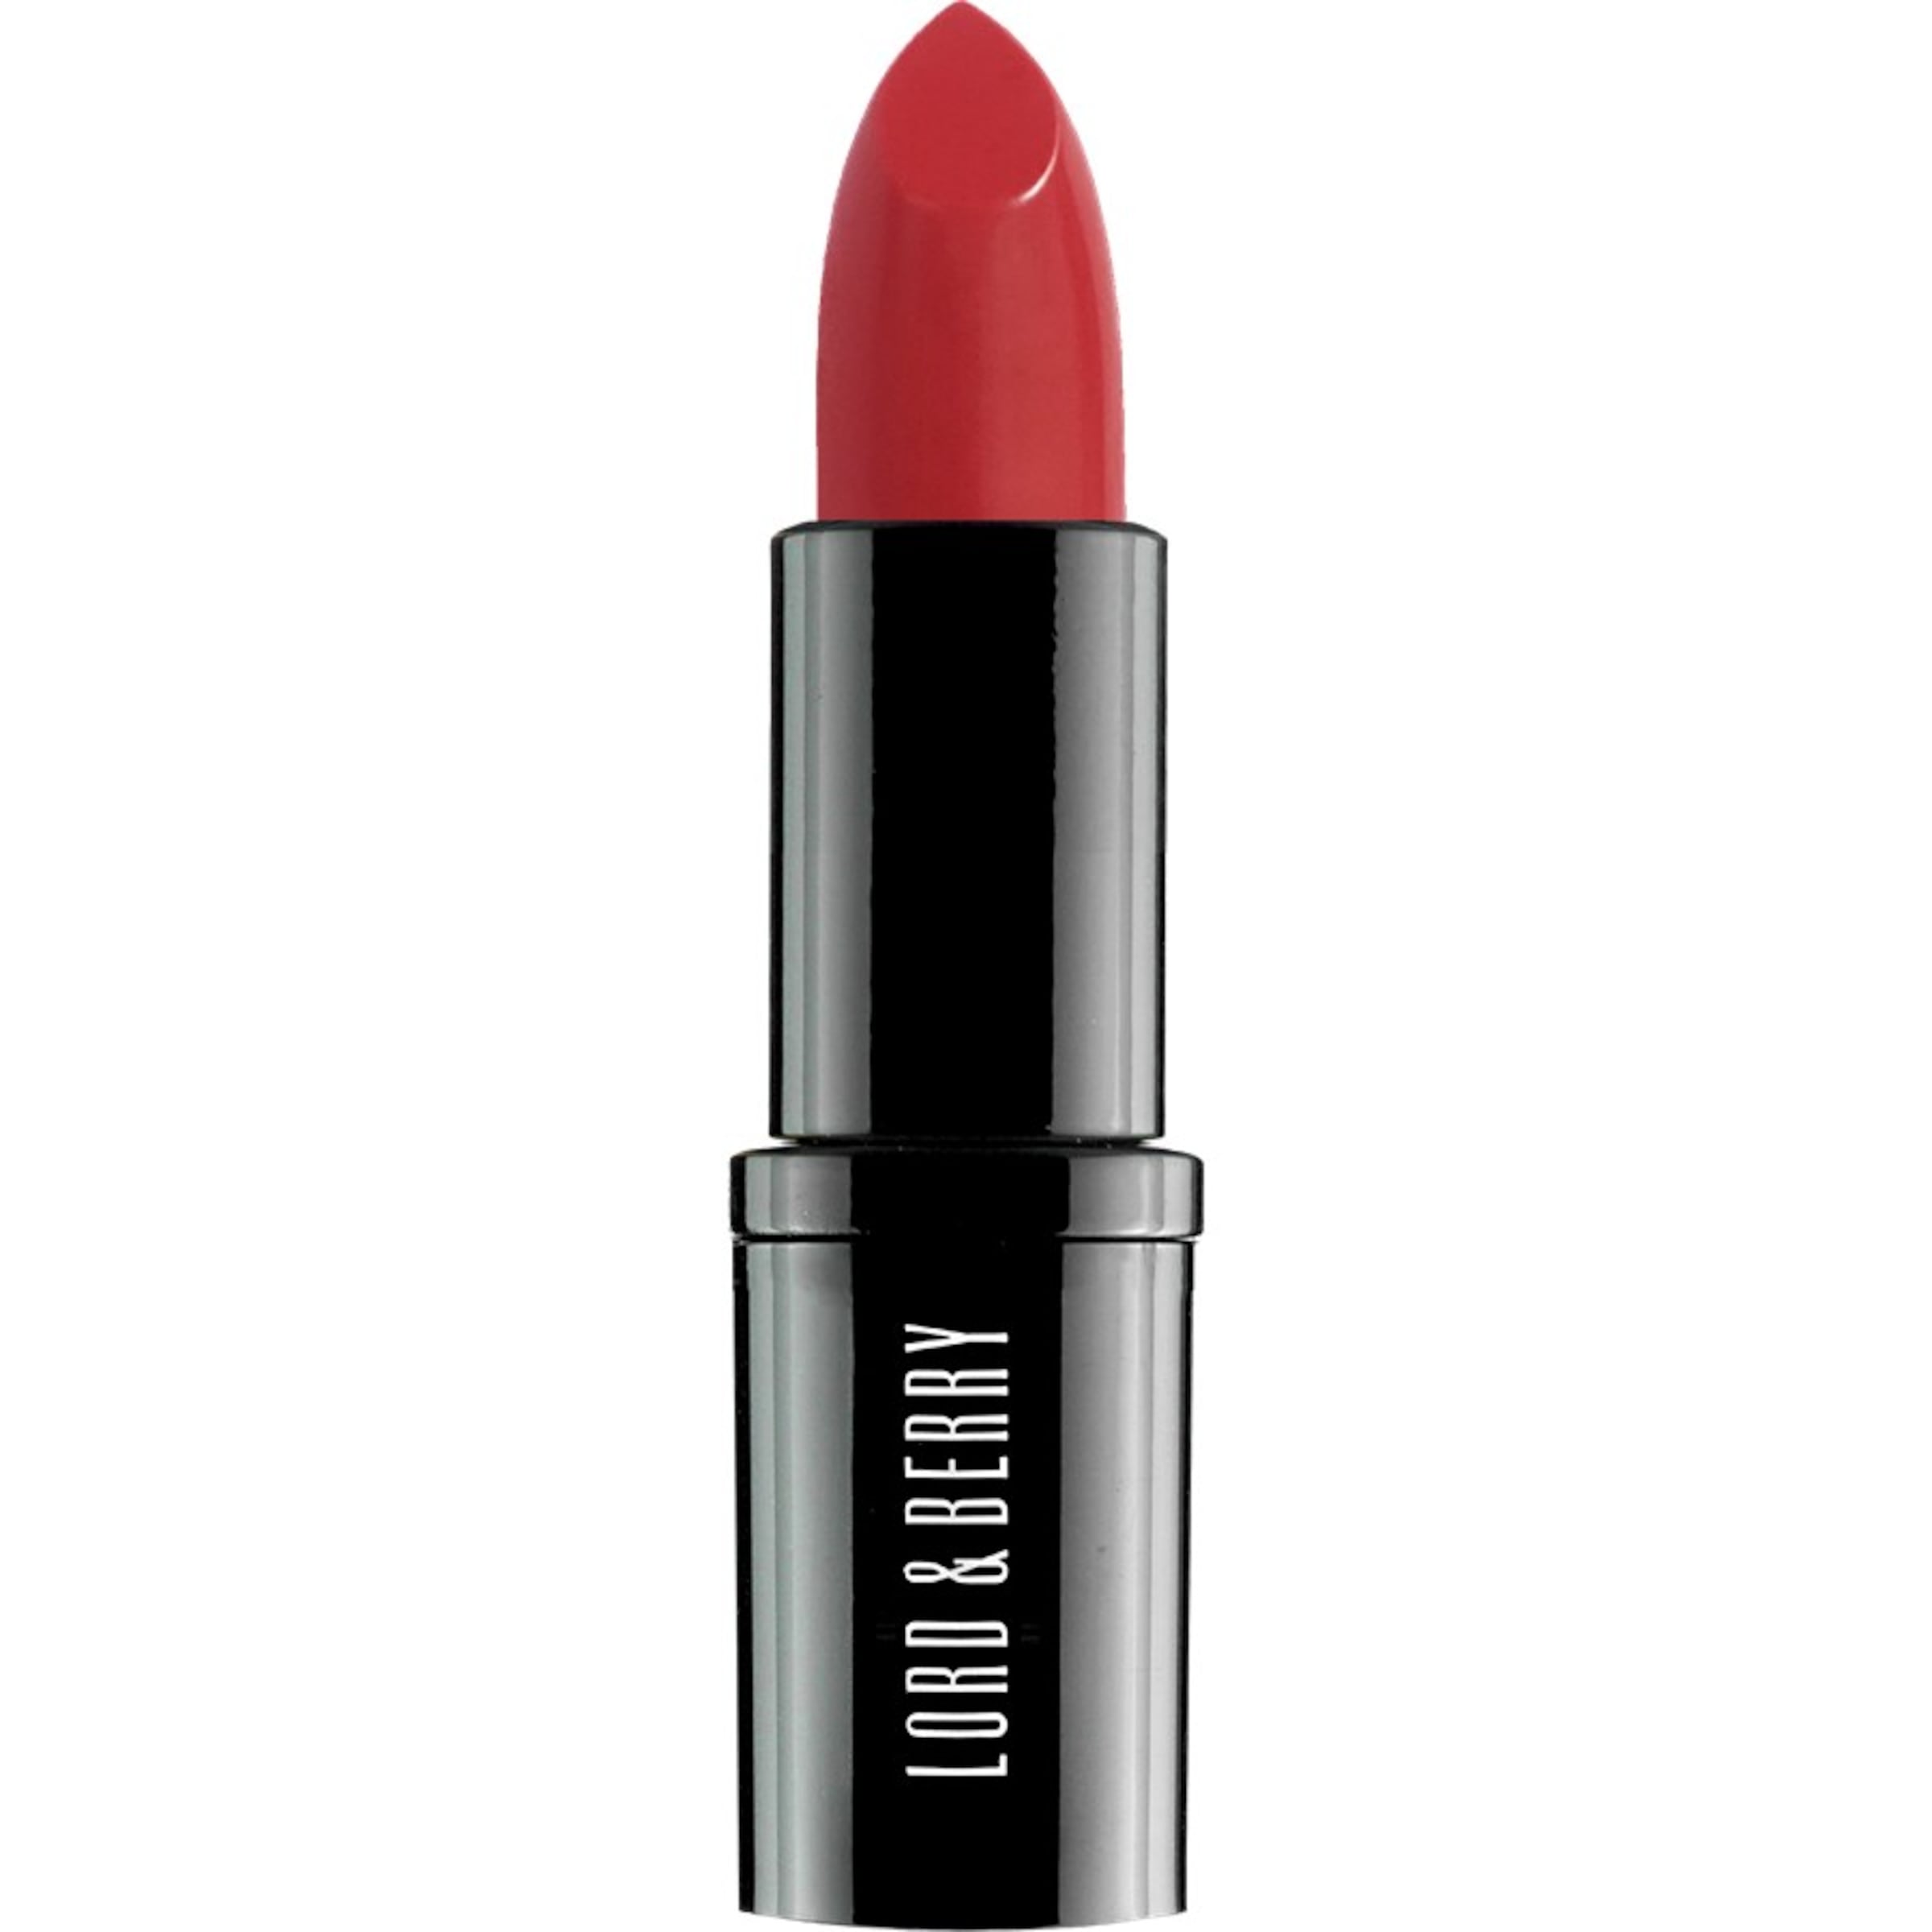 Lord & Berry Lippenstift Absolute in Rot 